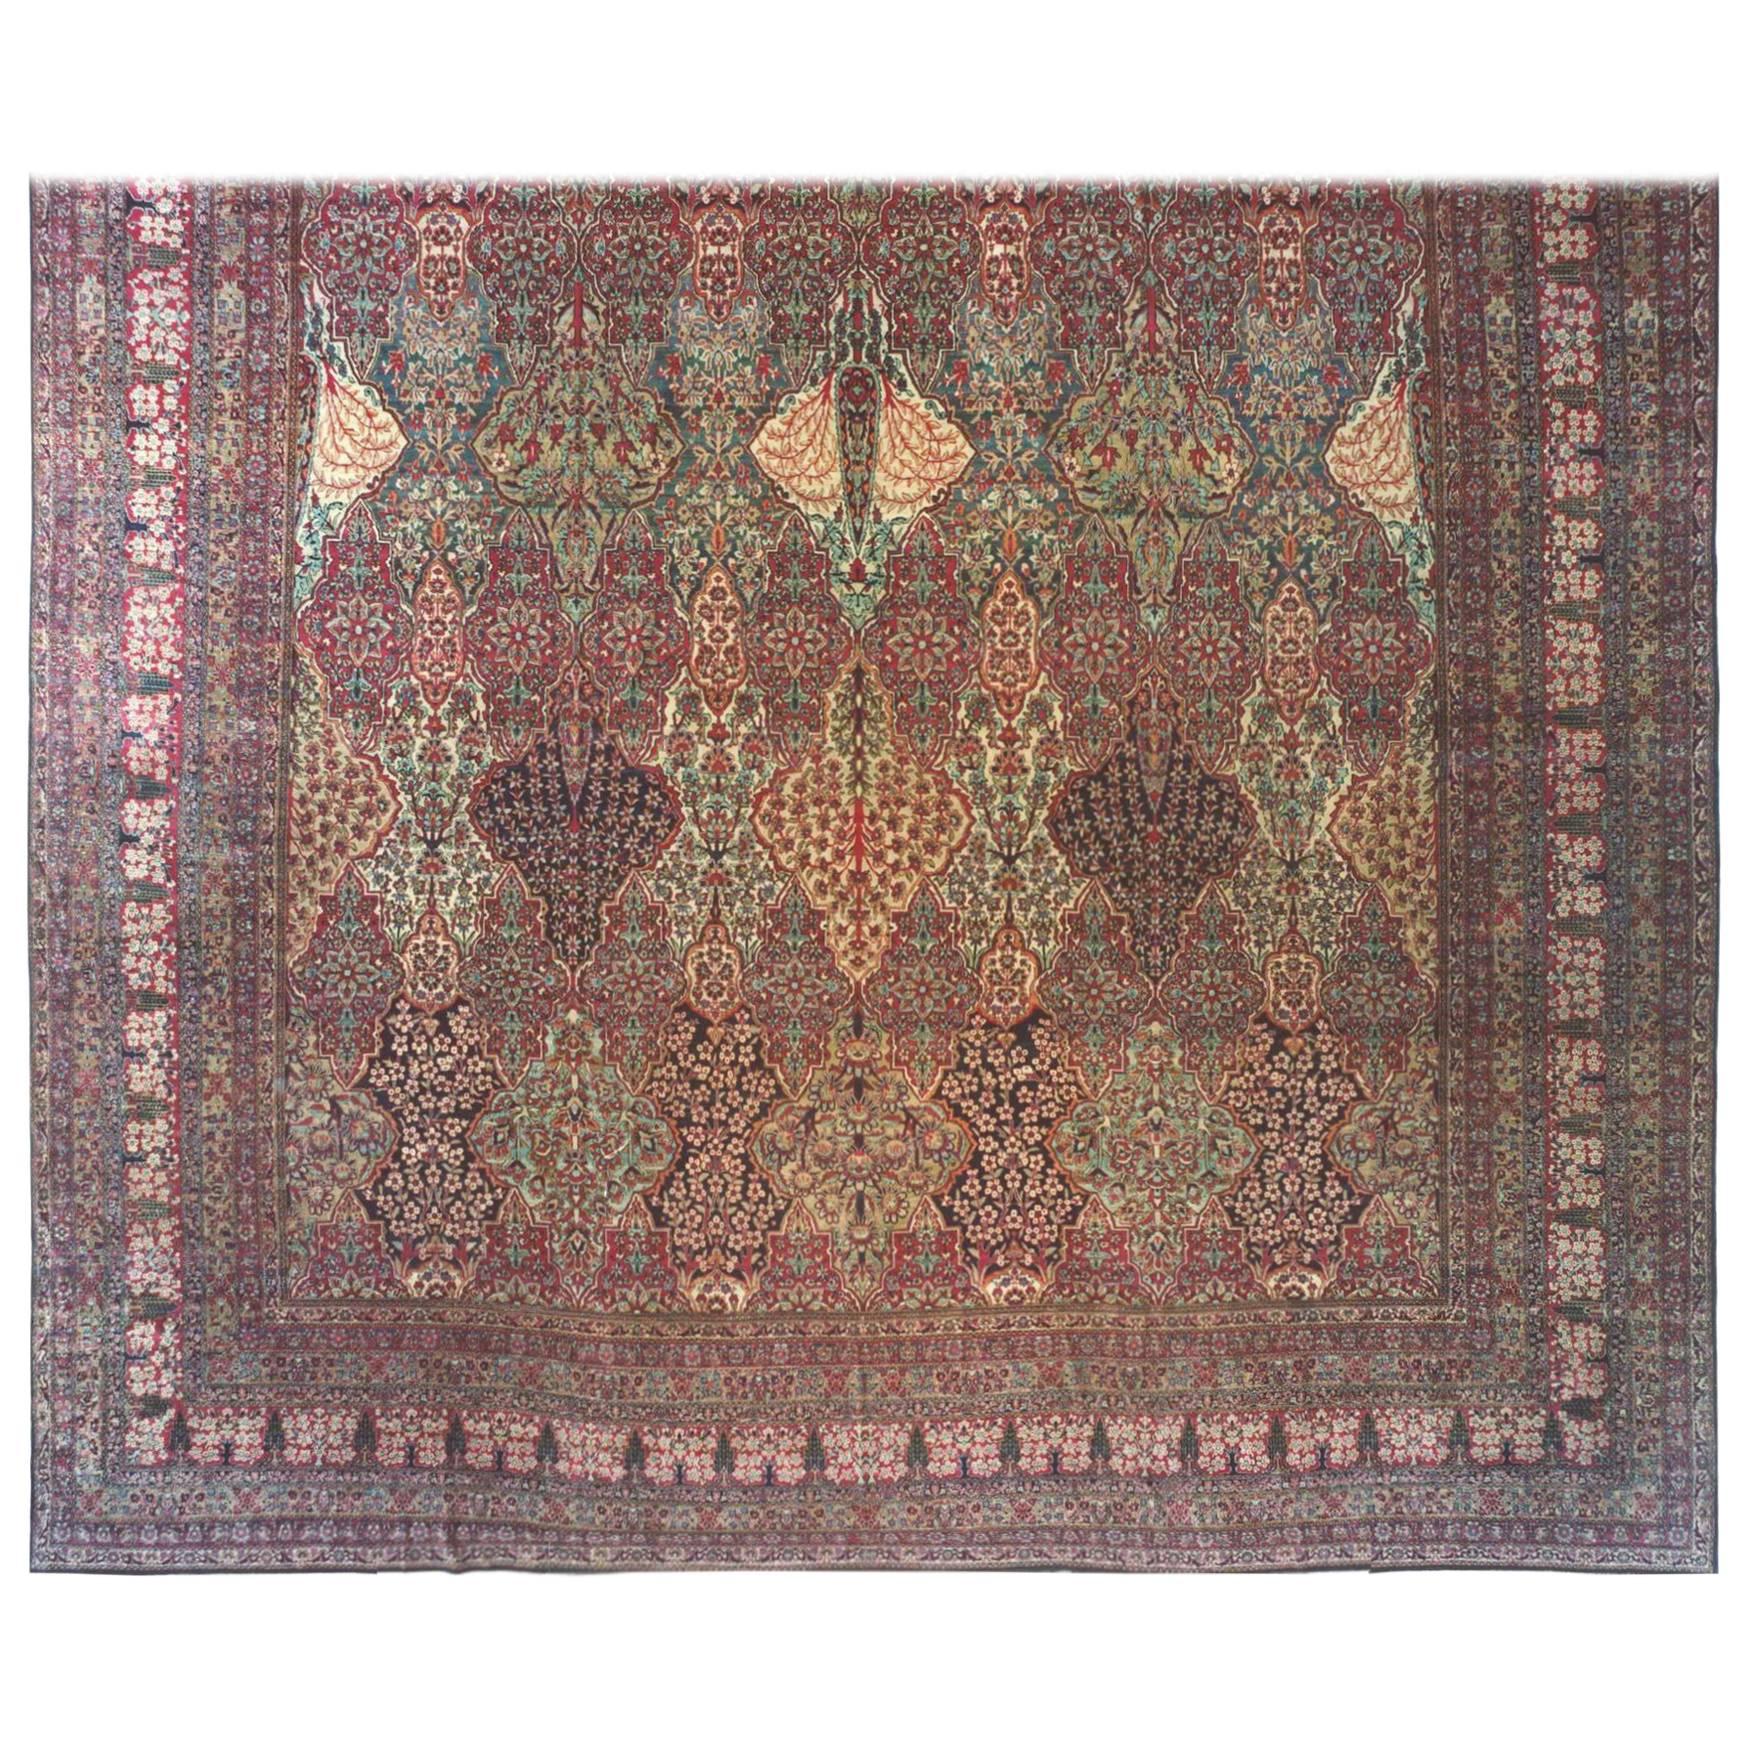 An antique Persian Lavar oriental carpet, size: 33'1 x 17'10, circa 1880. This handwoven oversized master work has an incredibly fine weave, and is characterized by a repeating diamond petagh design in the immense central field. The combination of